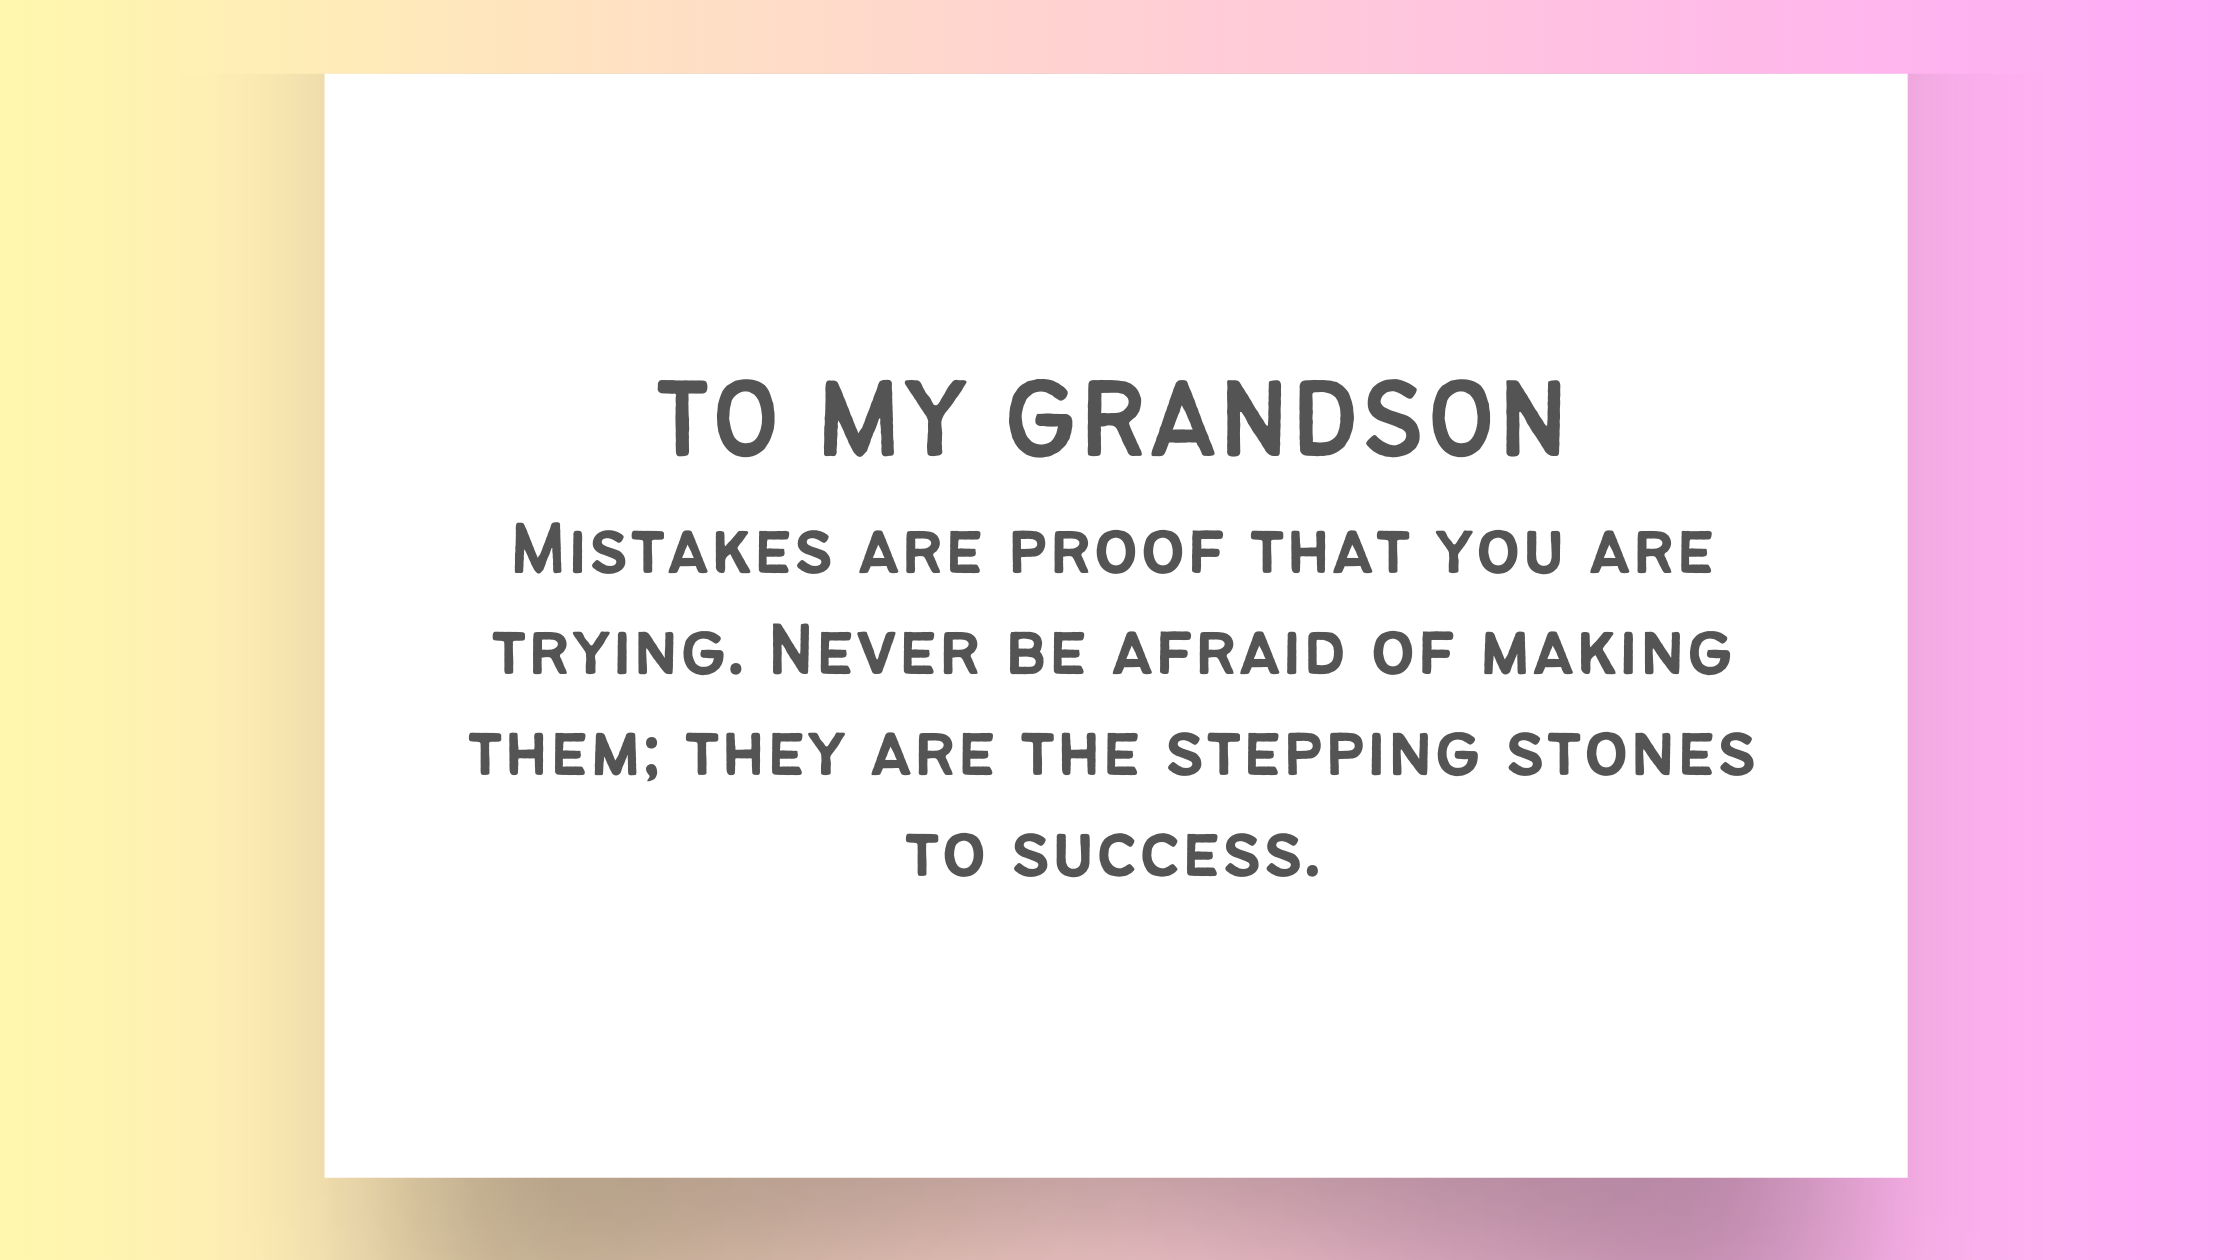 10 Heartfelt Life Lessons I Wish to Impart: A Message from Grandpa to His Grandson